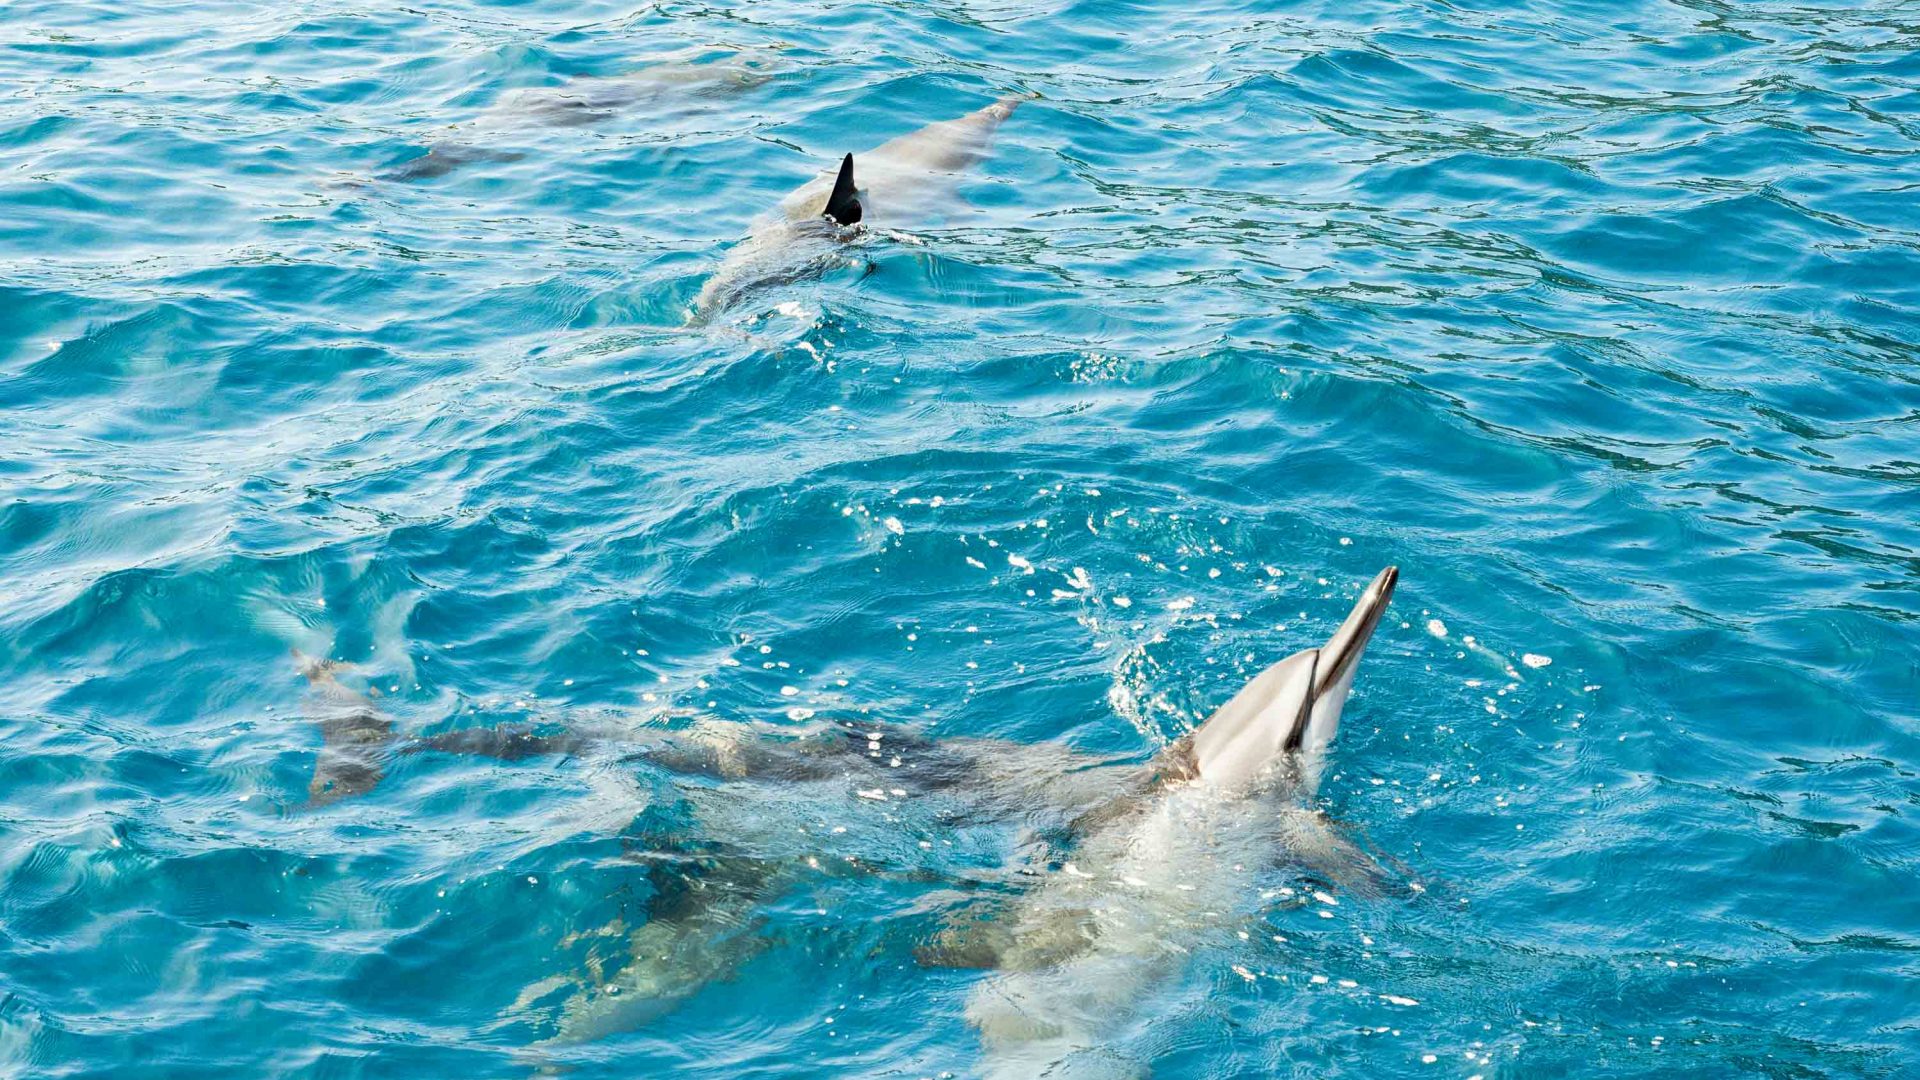 Spinner dolphins in the sea.